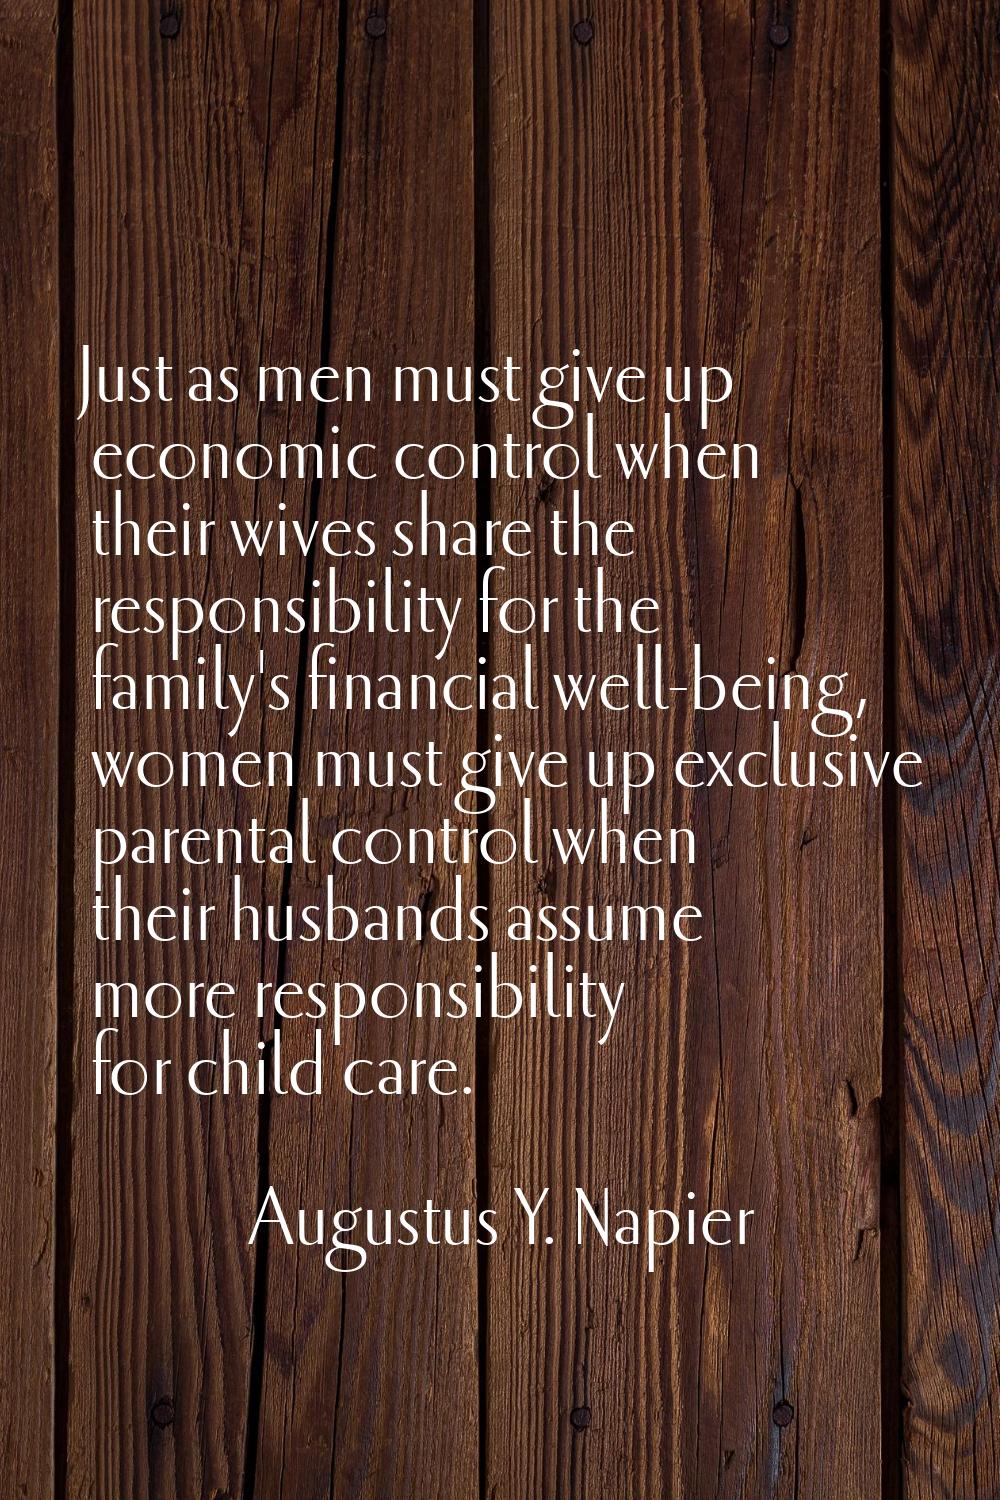 Just as men must give up economic control when their wives share the responsibility for the family'